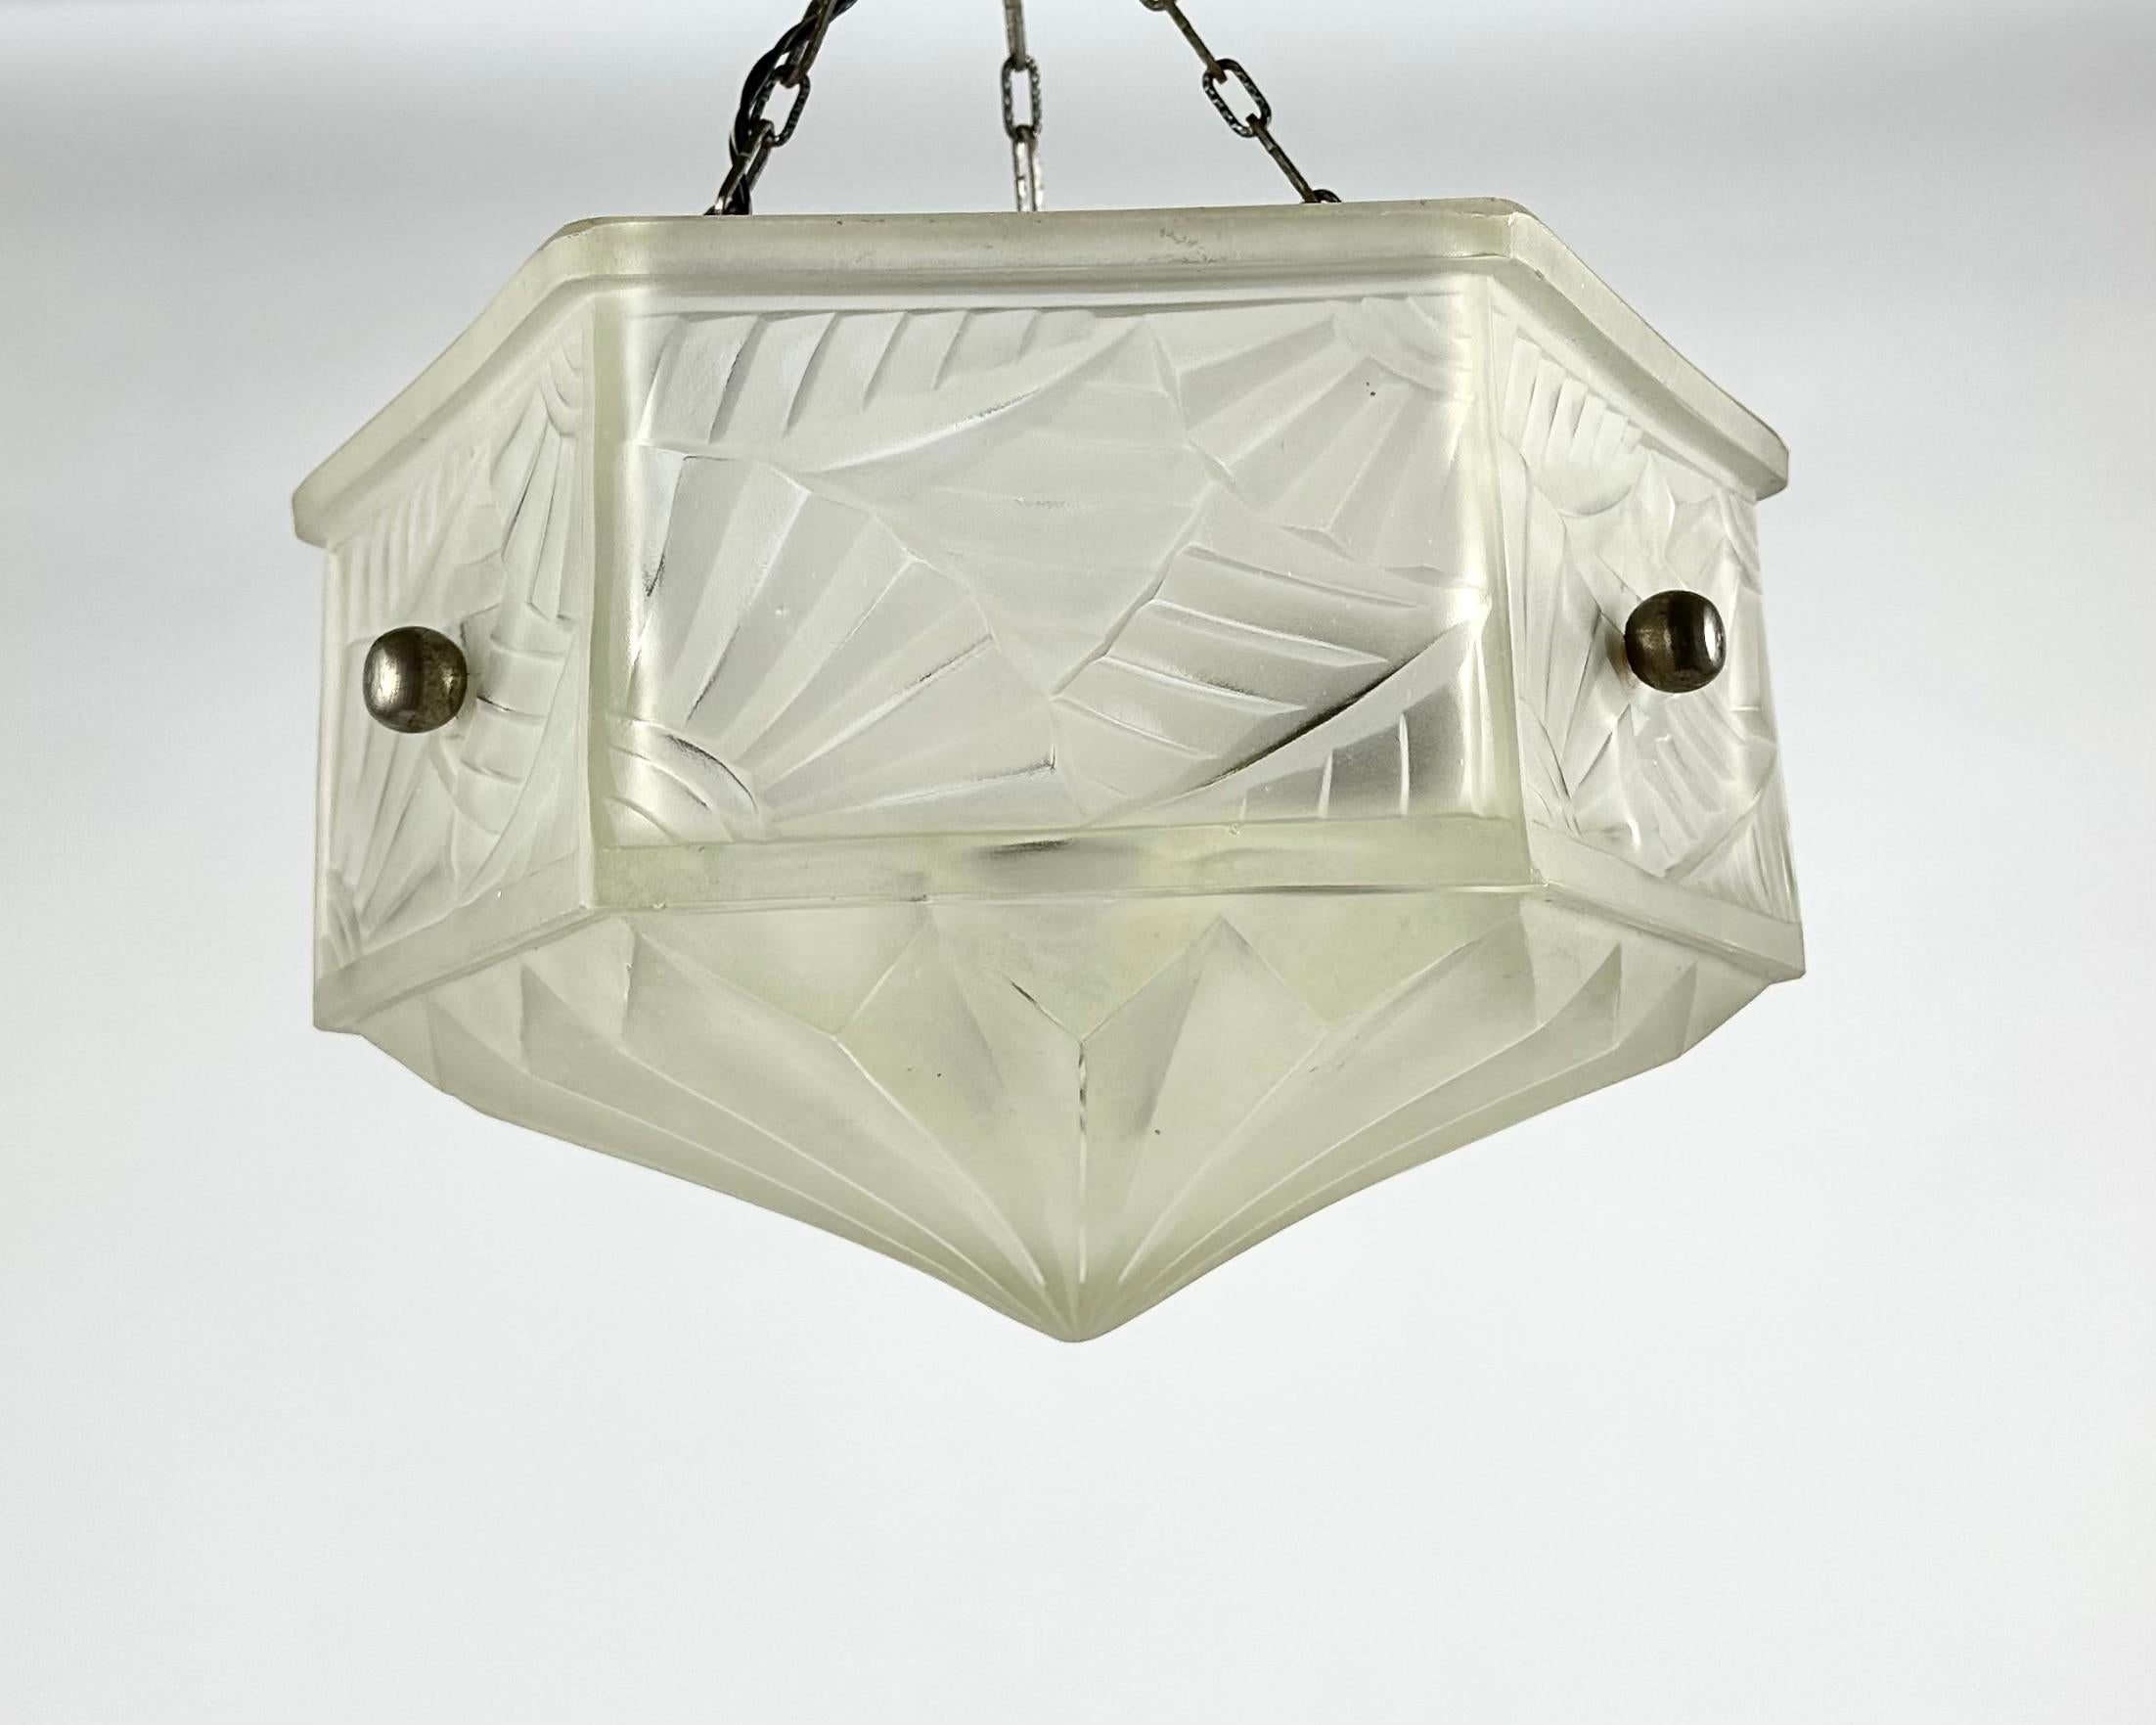 Art Deco pendant / chandelier from France. Period 1930 hand Molded-pressed glass with geometric decoration and stylized leaves.

Brass frame with three branches attached to the basin by three hanging points.

When the light pours through, the glass